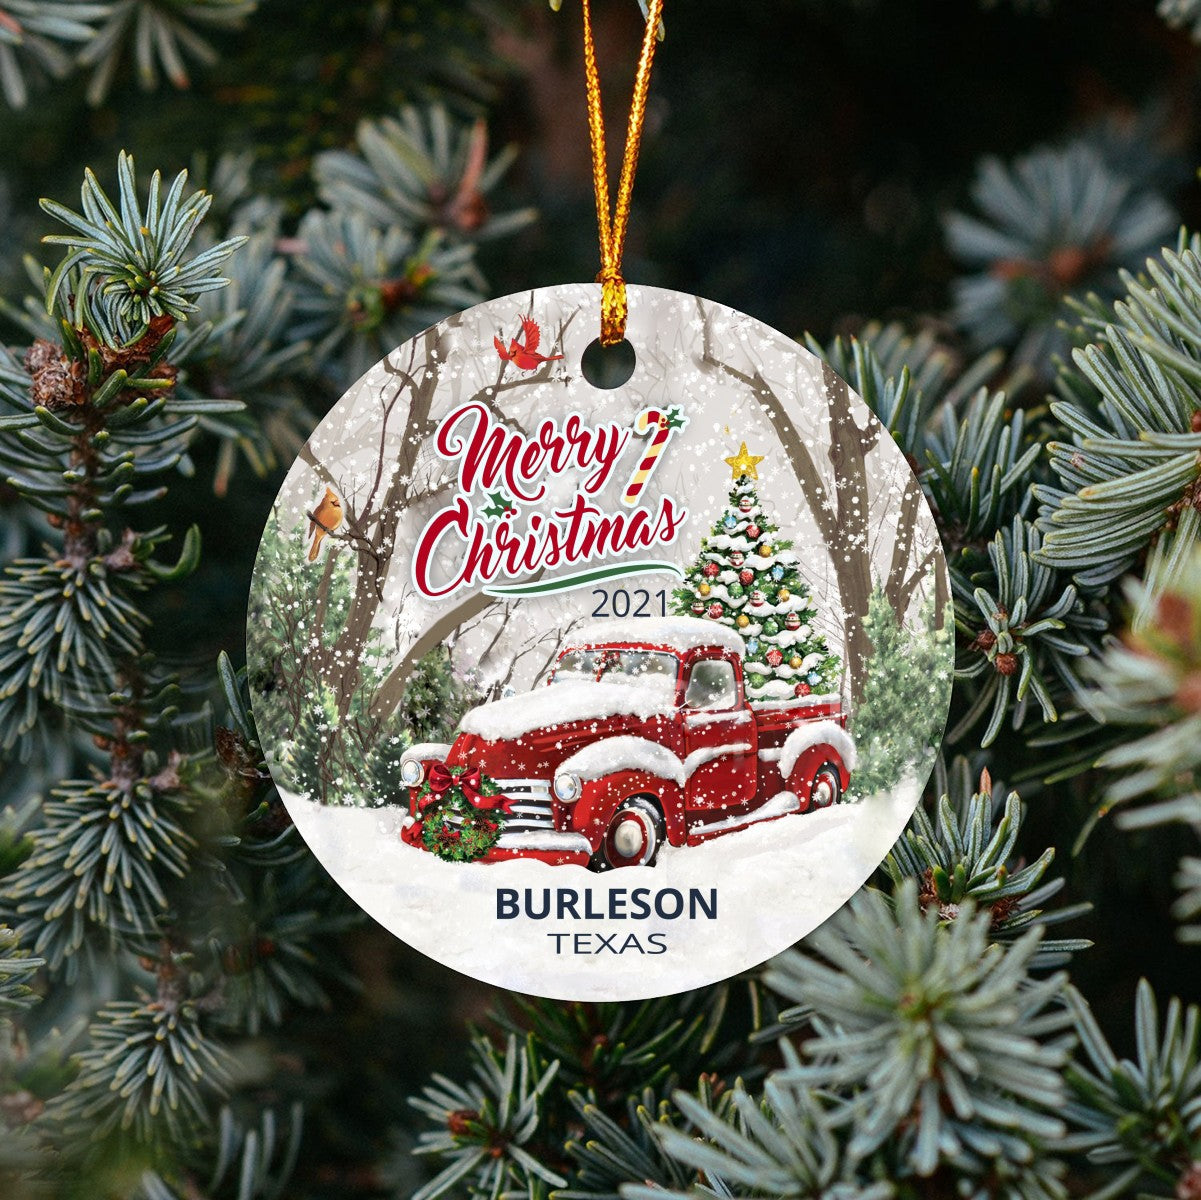 Christmas Tree Ornaments Burleson - Ornament Customize With Name City And State Burleson Texas TX - Red Truck Xmas Ornaments 3'' Plastic Gift For Family, Friend And Housewarming